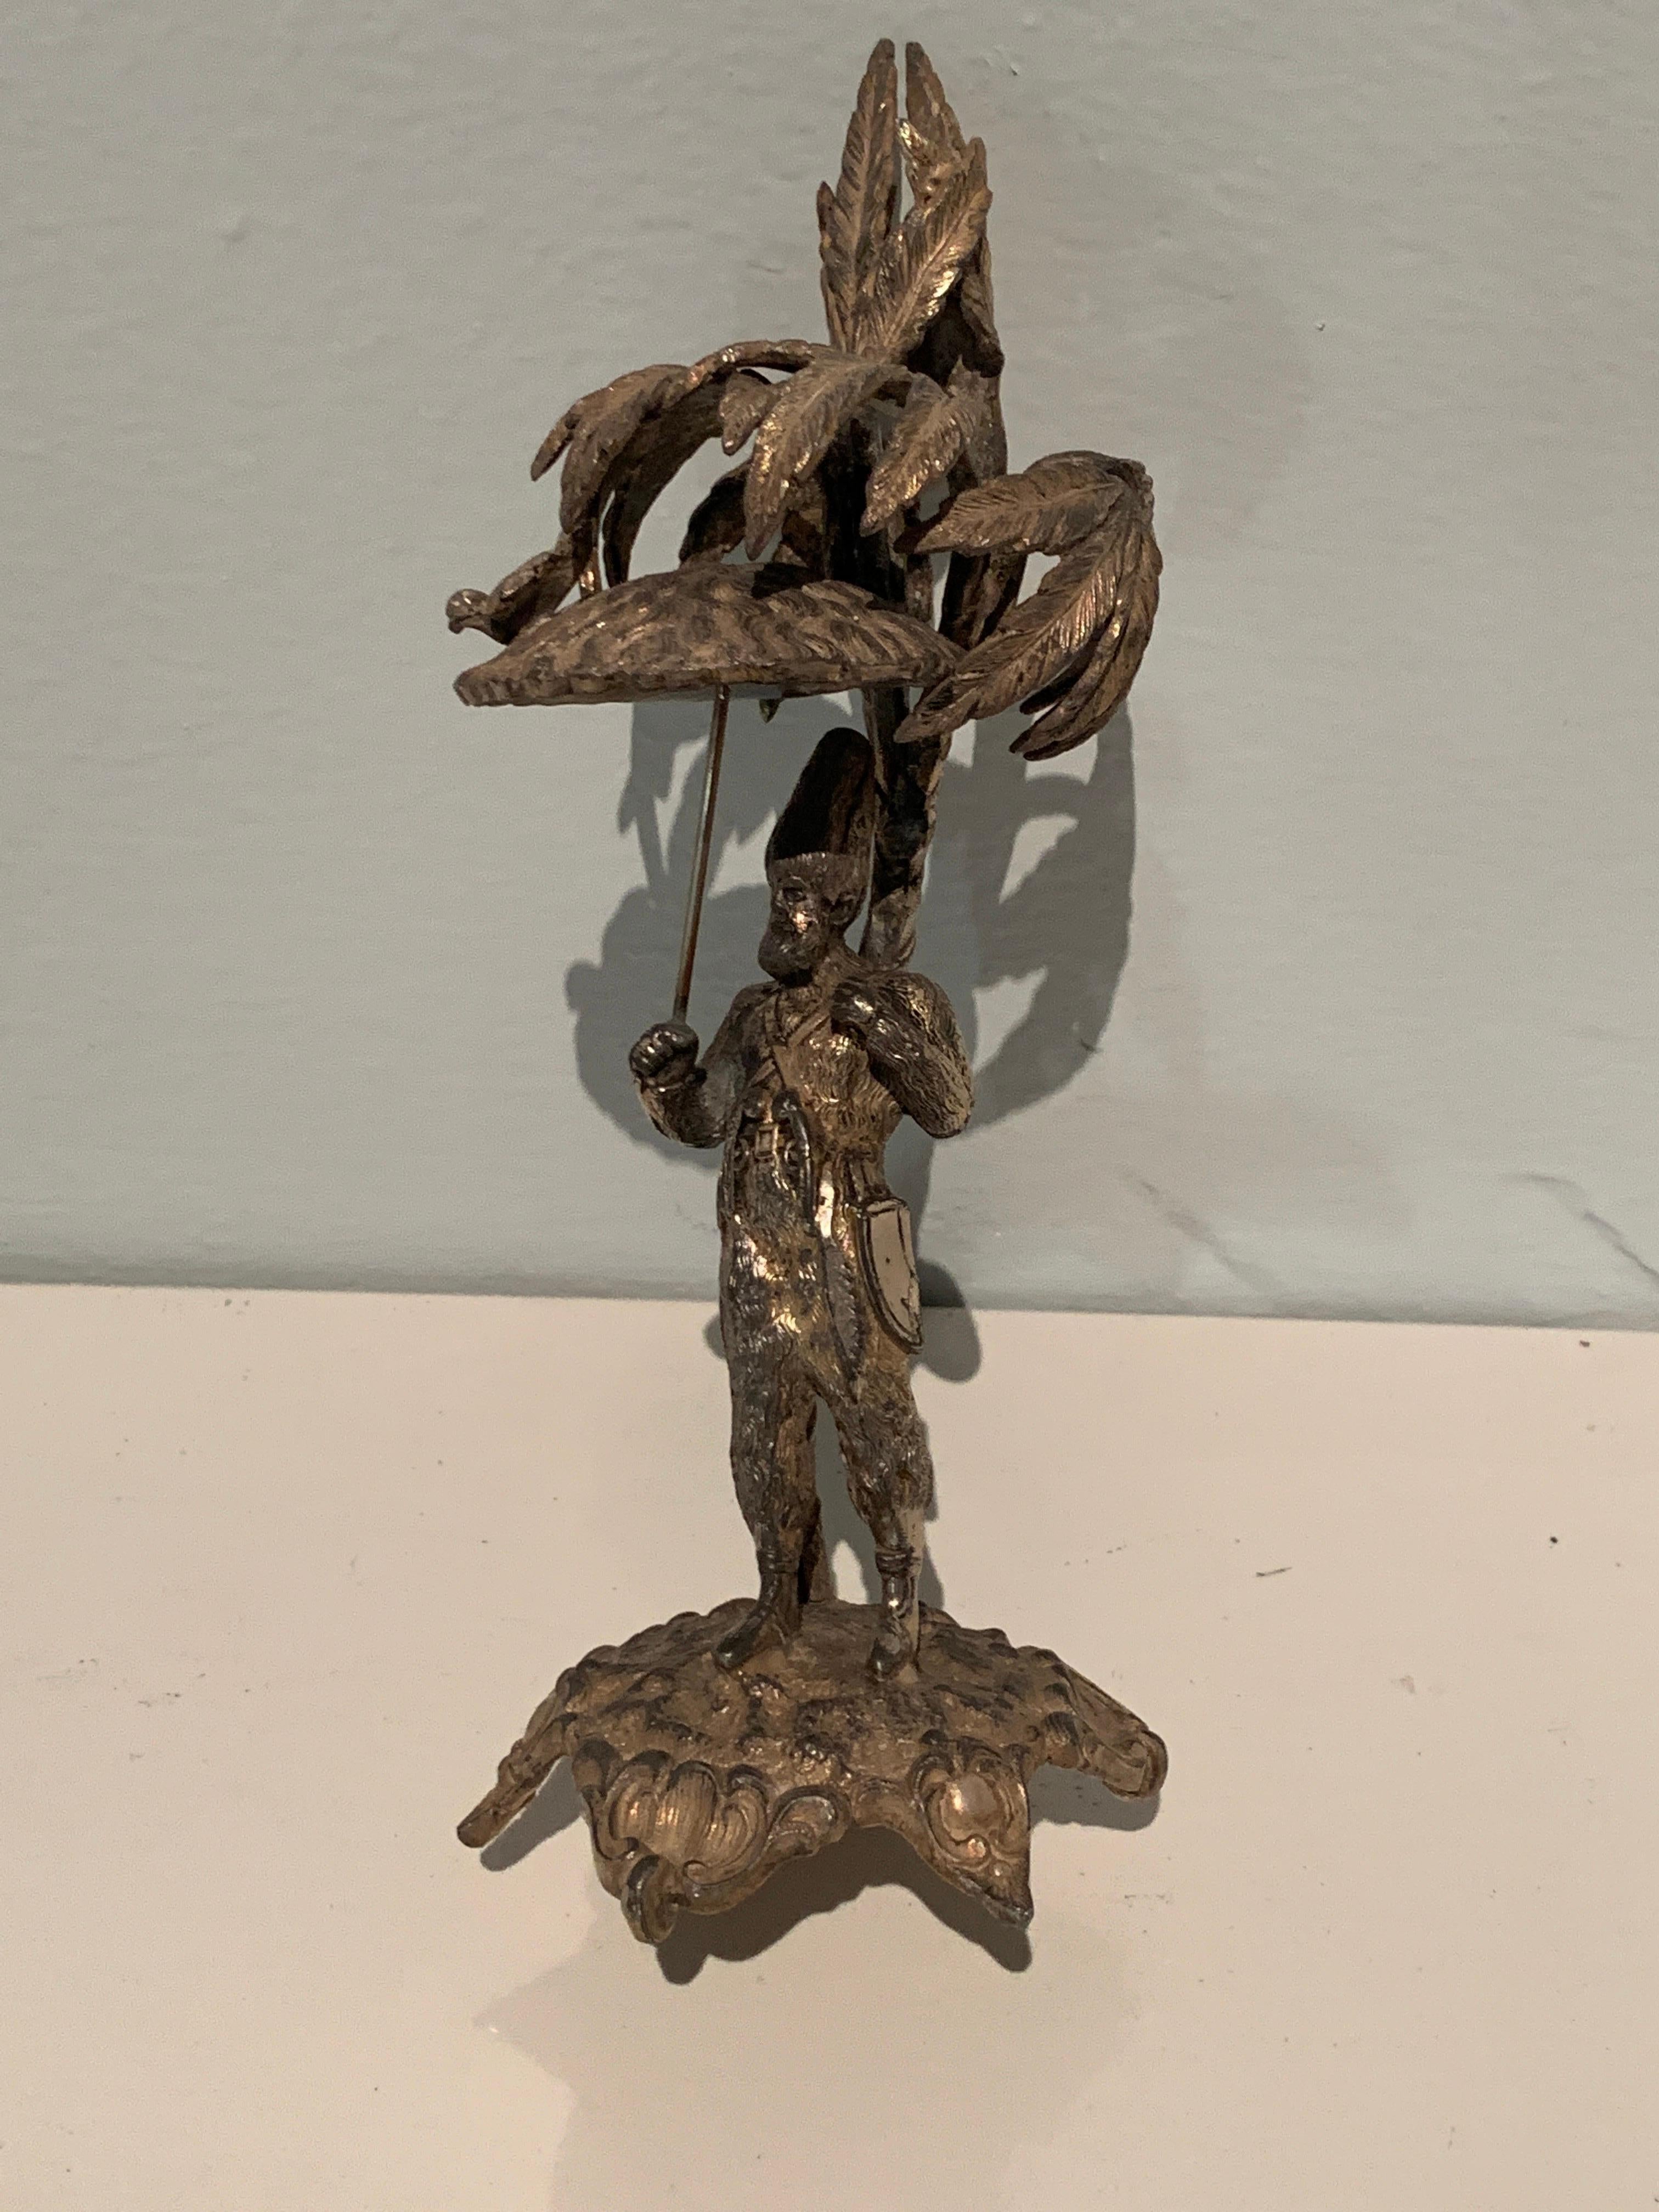 A unique piece - a man, perhaps a jester, holding an umbrella with a bird. The piece would make a nice decorative item or even a paperweight. Folkart decorative.